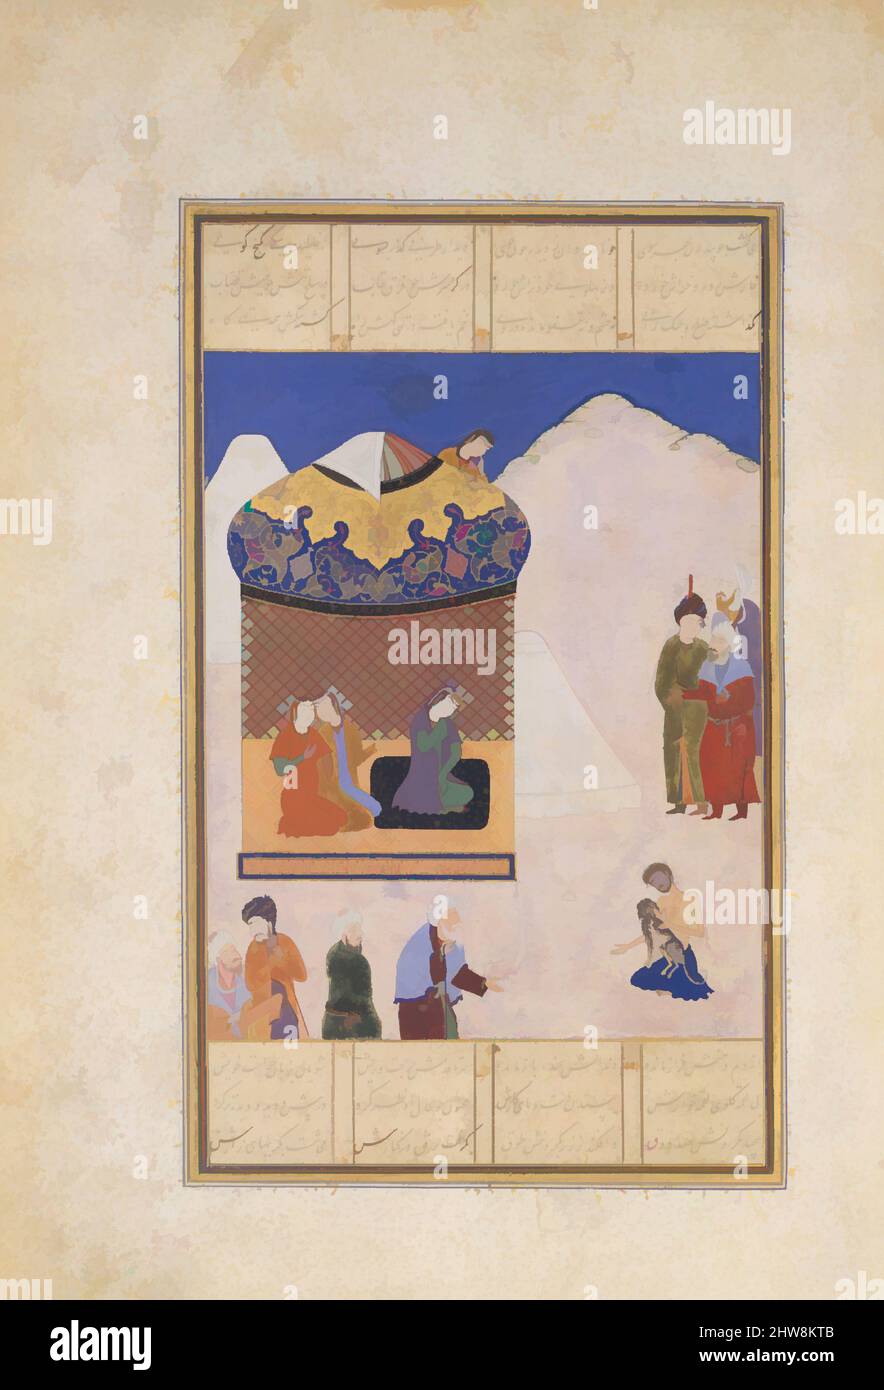 Art inspired by Laila Visiting Majnun in the Desert', Folio from a Khamsa (Quintet) of Amir Khusrau Dihlavi, 1520–25, Made in present-day Afghanistan, Herat, Ink, opaque watercolor, and gold on paper, 8 1/2 x 5 1/4in. (21.6 x 13.3cm), Codices, Classic works modernized by Artotop with a splash of modernity. Shapes, color and value, eye-catching visual impact on art. Emotions through freedom of artworks in a contemporary way. A timeless message pursuing a wildly creative new direction. Artists turning to the digital medium and creating the Artotop NFT Stock Photo